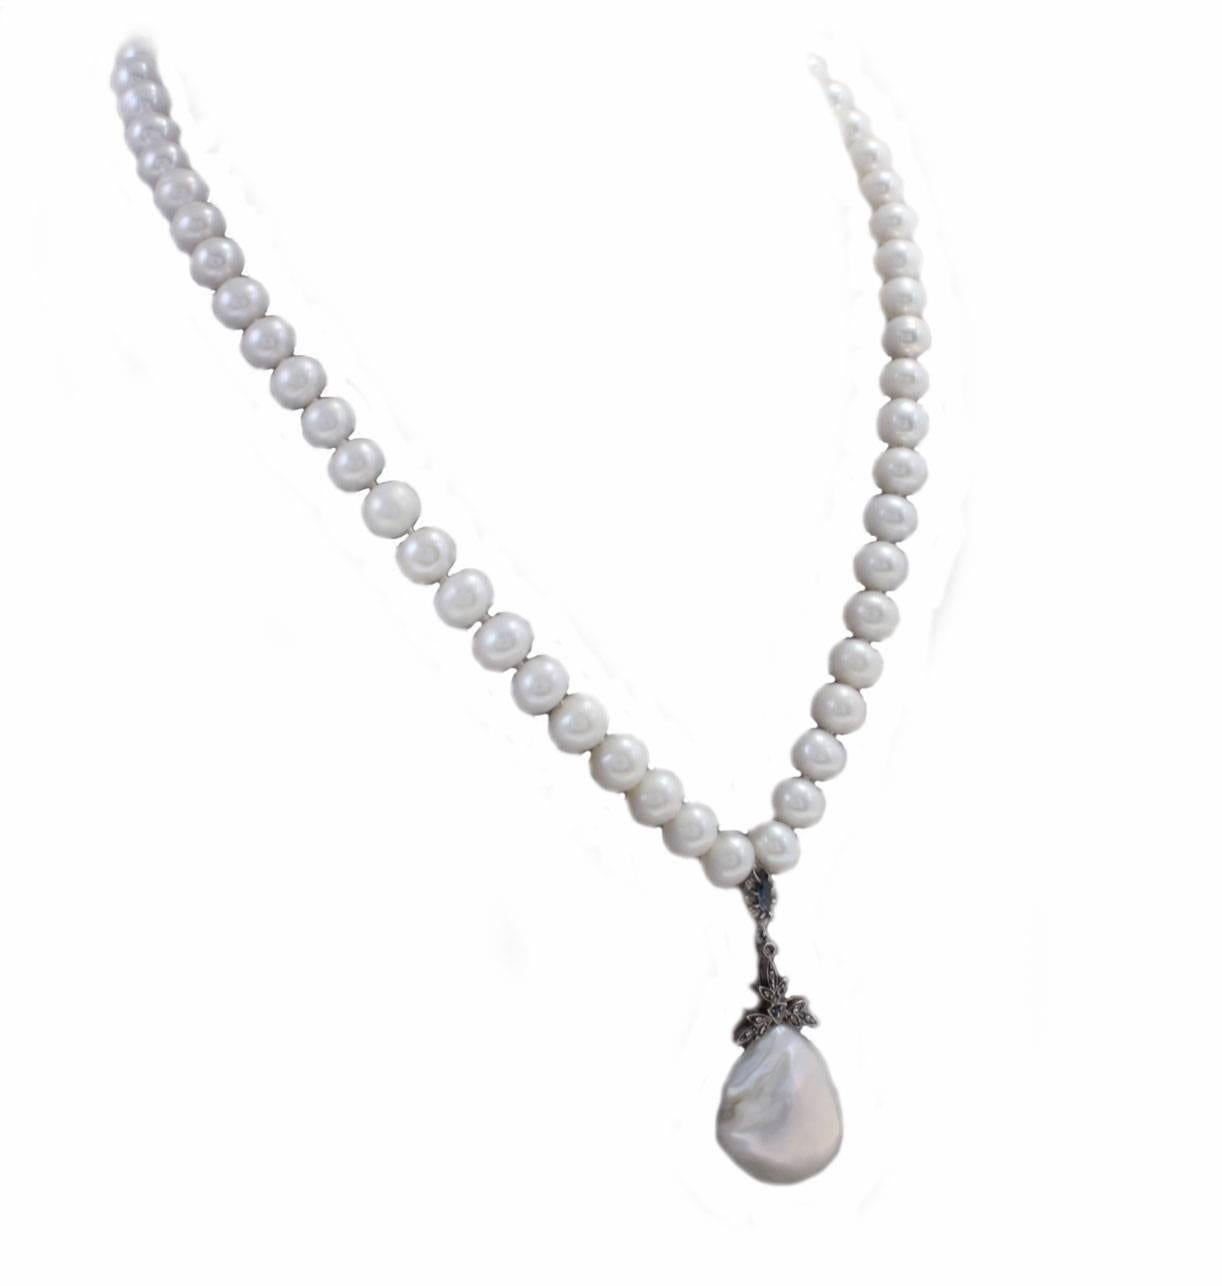 Beaded necklace in 9kt yellow gold and silver with a mother-of-pearl pendant embellished with diamonds and blue sapphires.

diamonds 0.08kt
pearls 7mm/0.27inch
tot weight 47.9gr
r.f. iea

